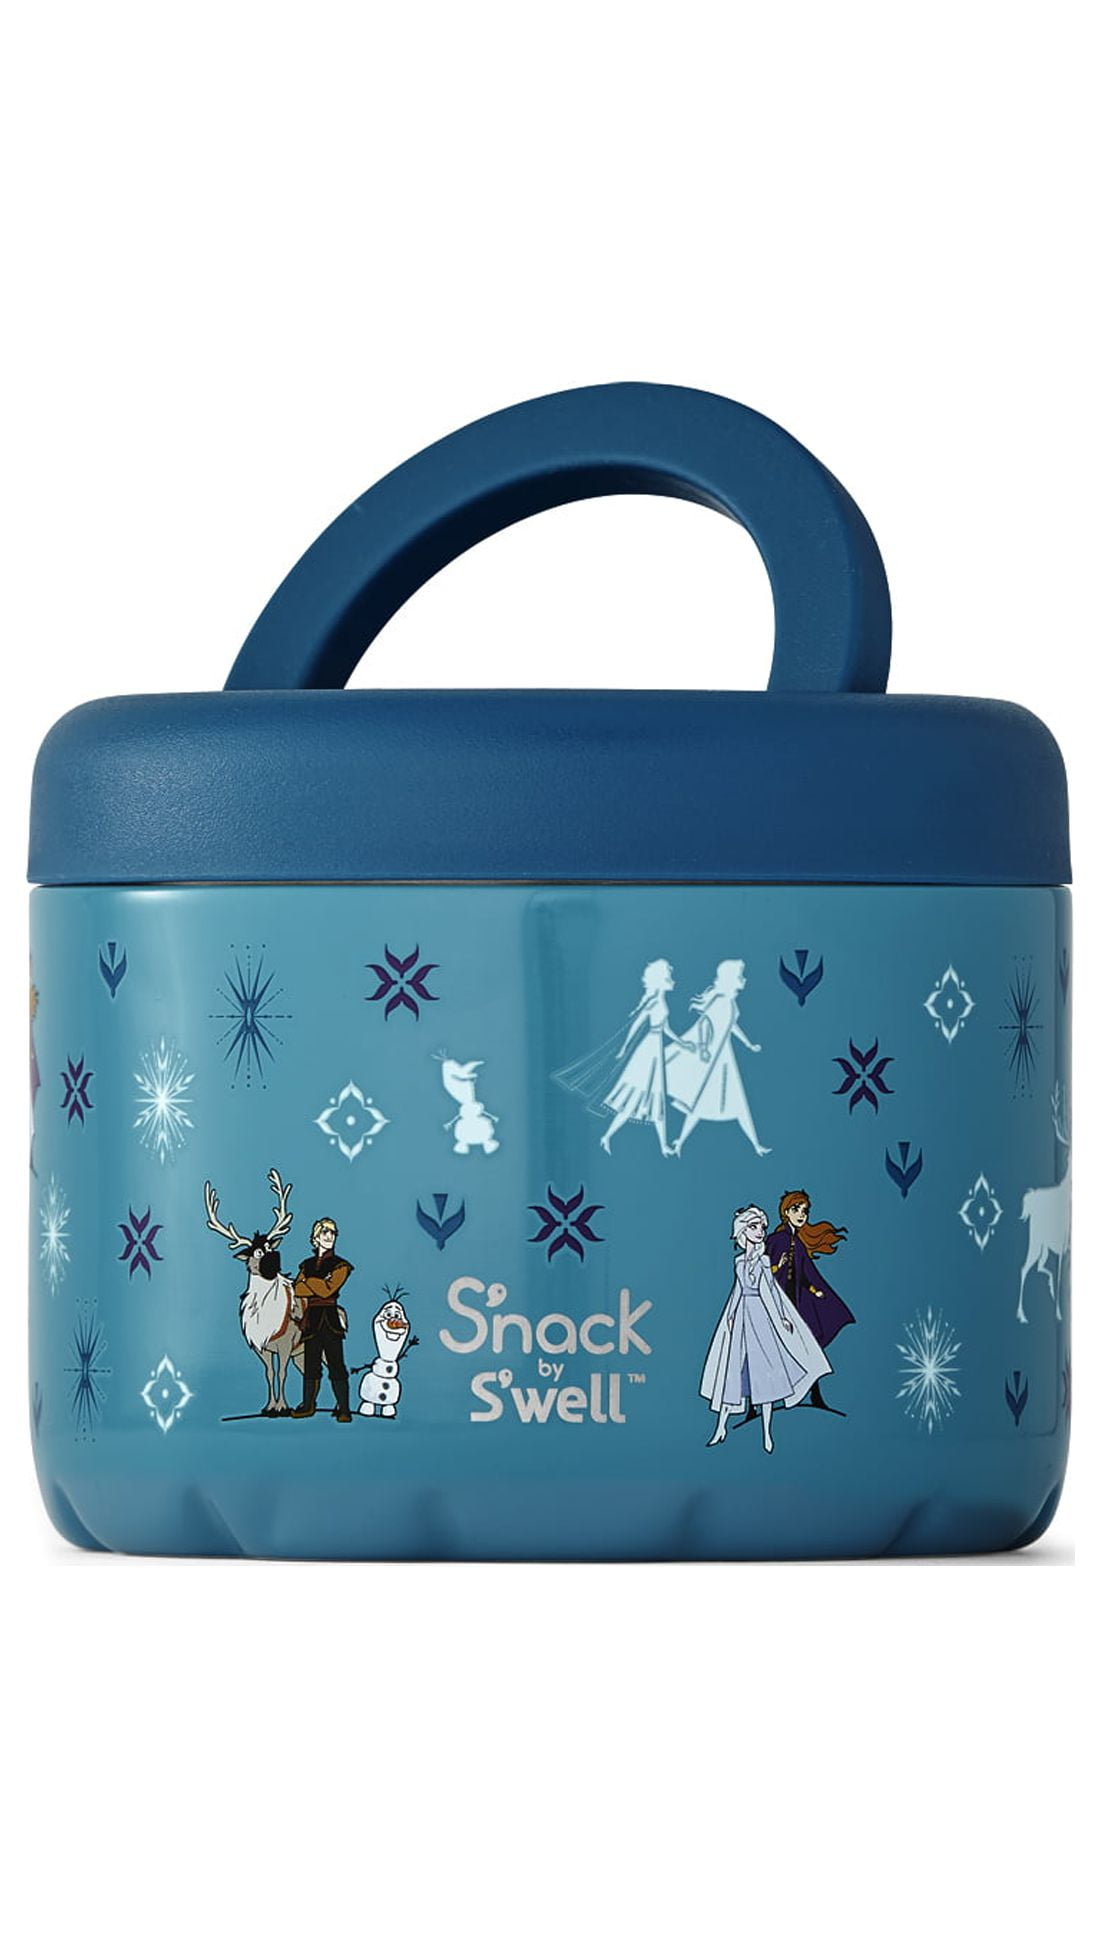 S'nack by Swell Vacuum Insulated Stanless Steel Food Container - Cherries,  10 oz - Fry's Food Stores